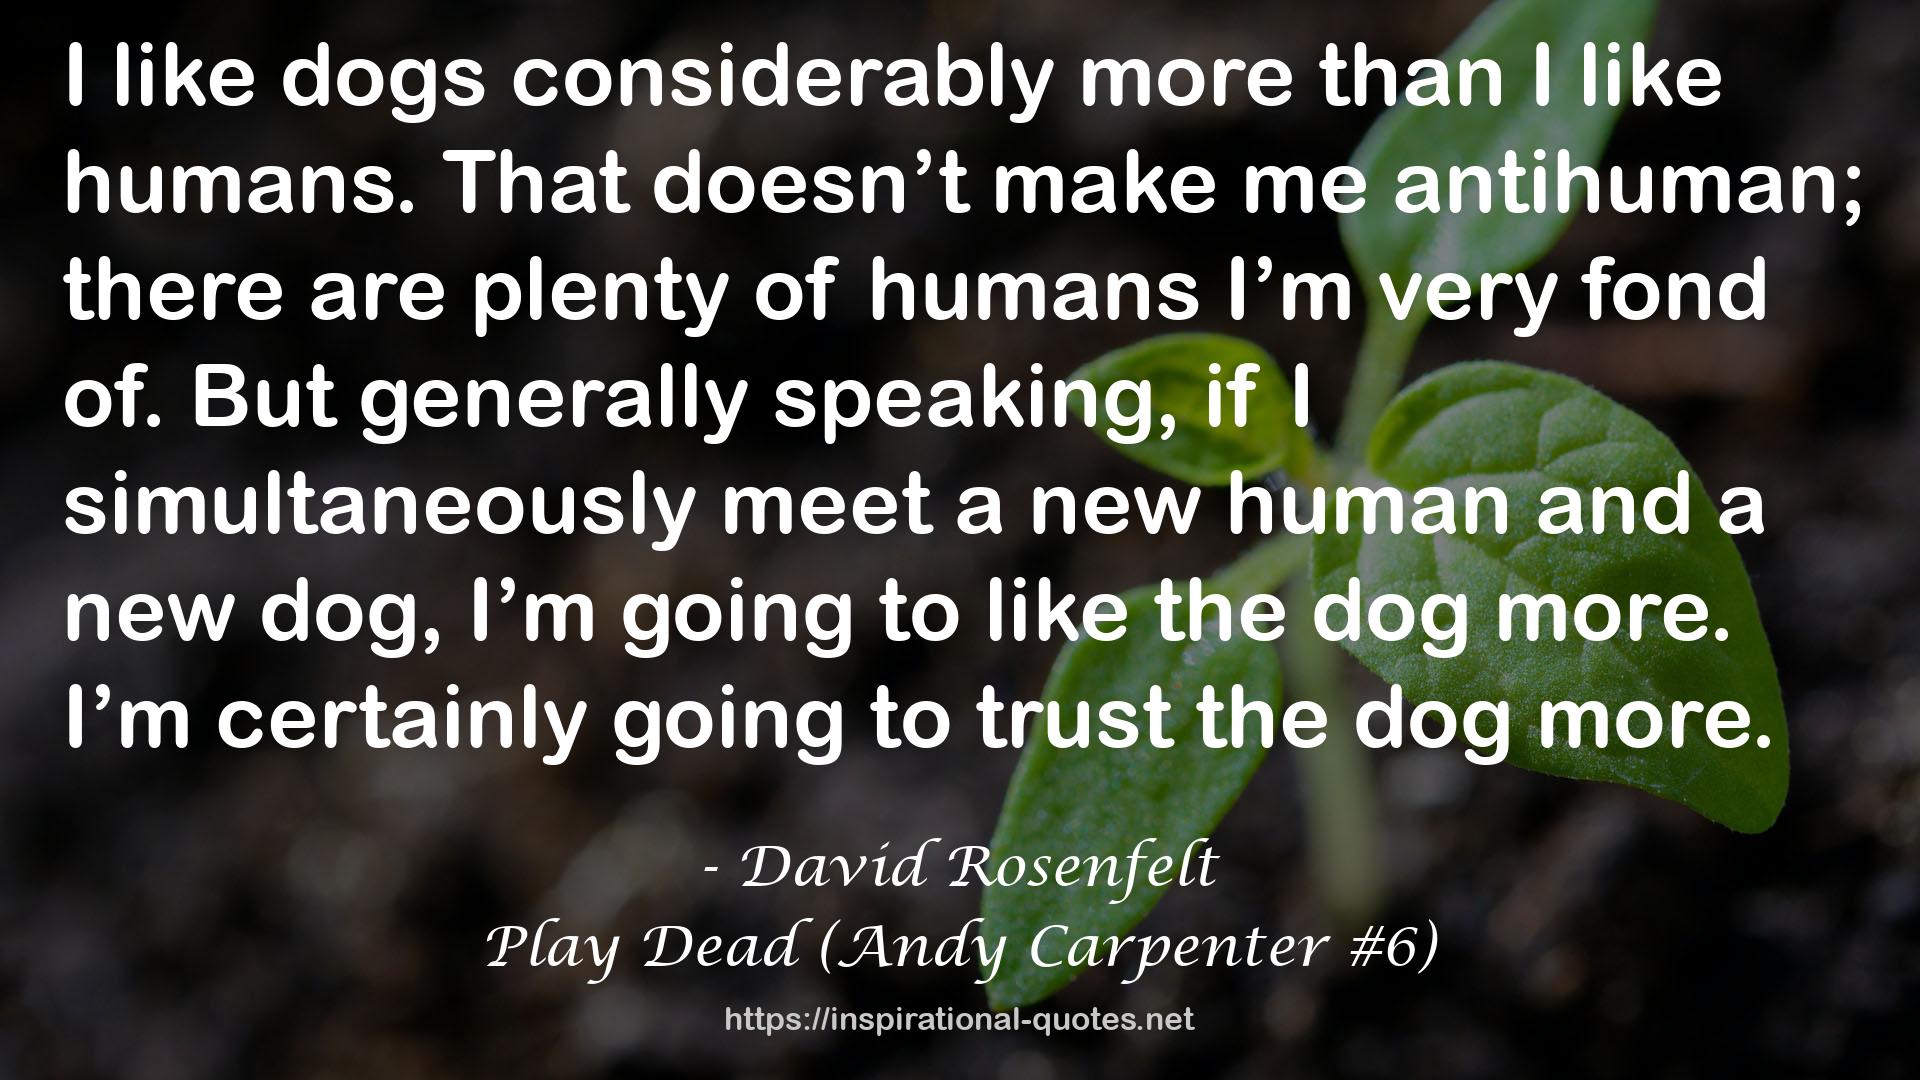 Play Dead (Andy Carpenter #6) QUOTES